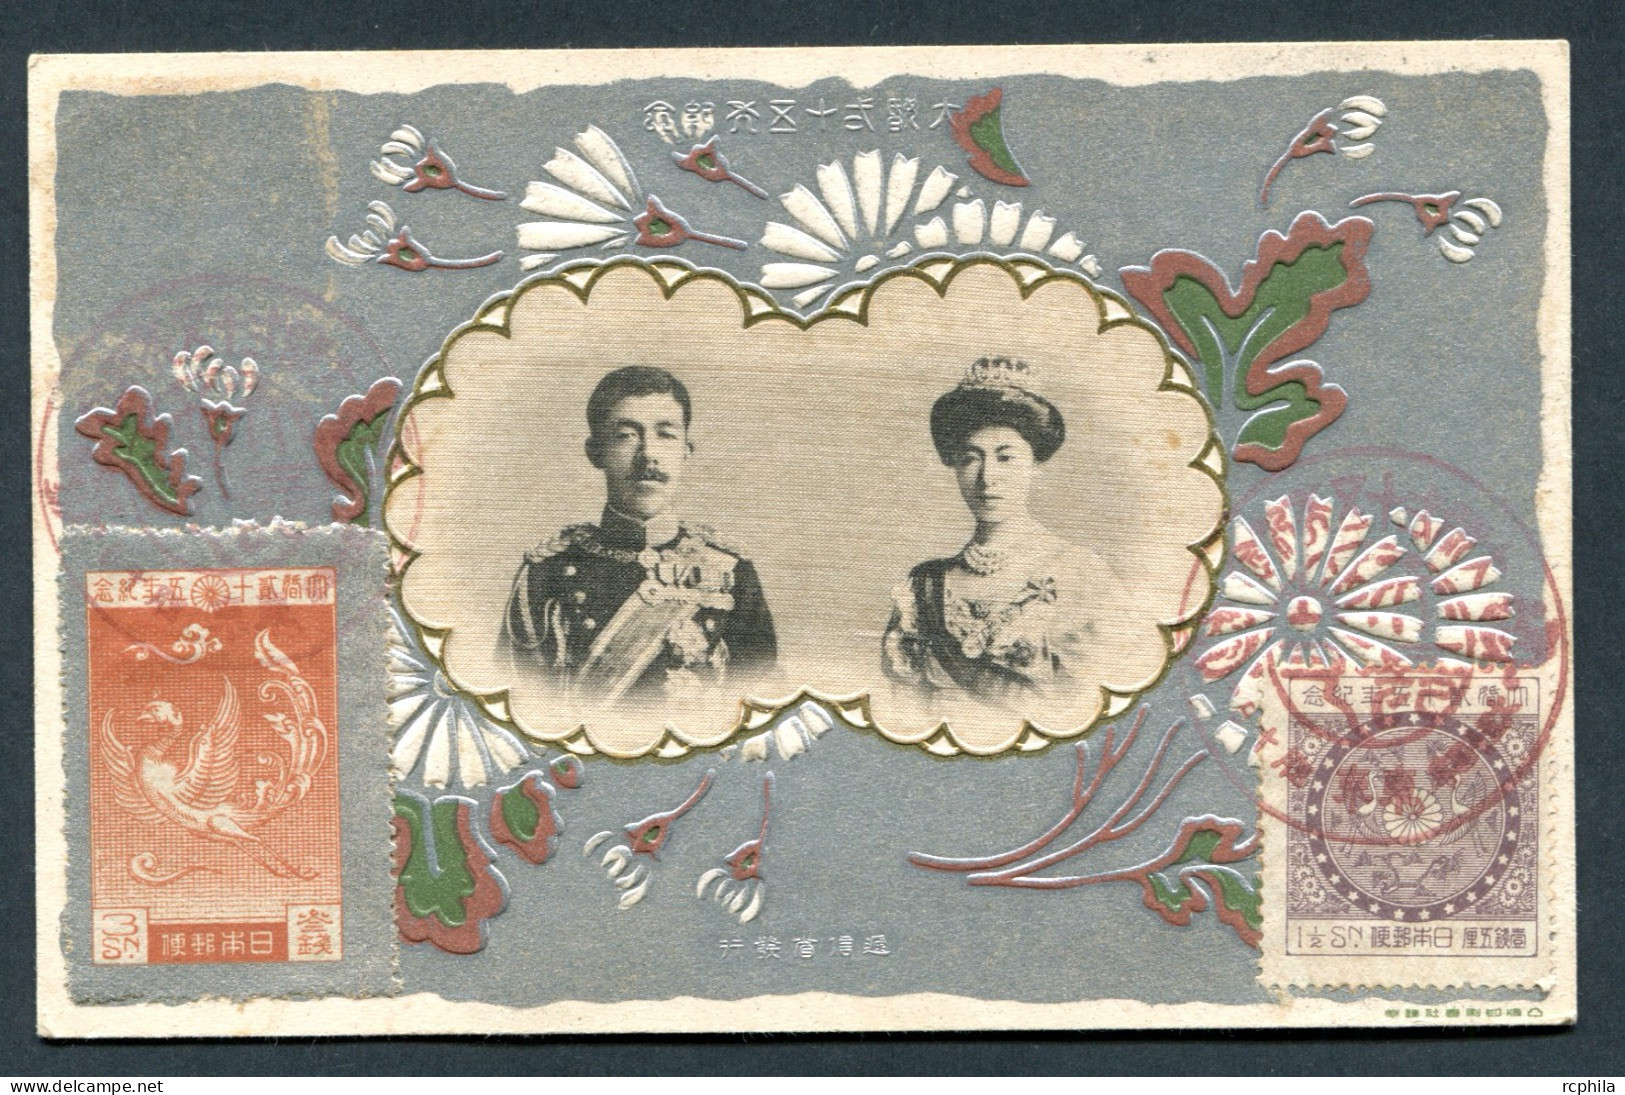 RC 26332 JAPON 1925 SILVER WEDDING RED COMMEMORATIVE POSTMARK FDC CARD VF - Storia Postale